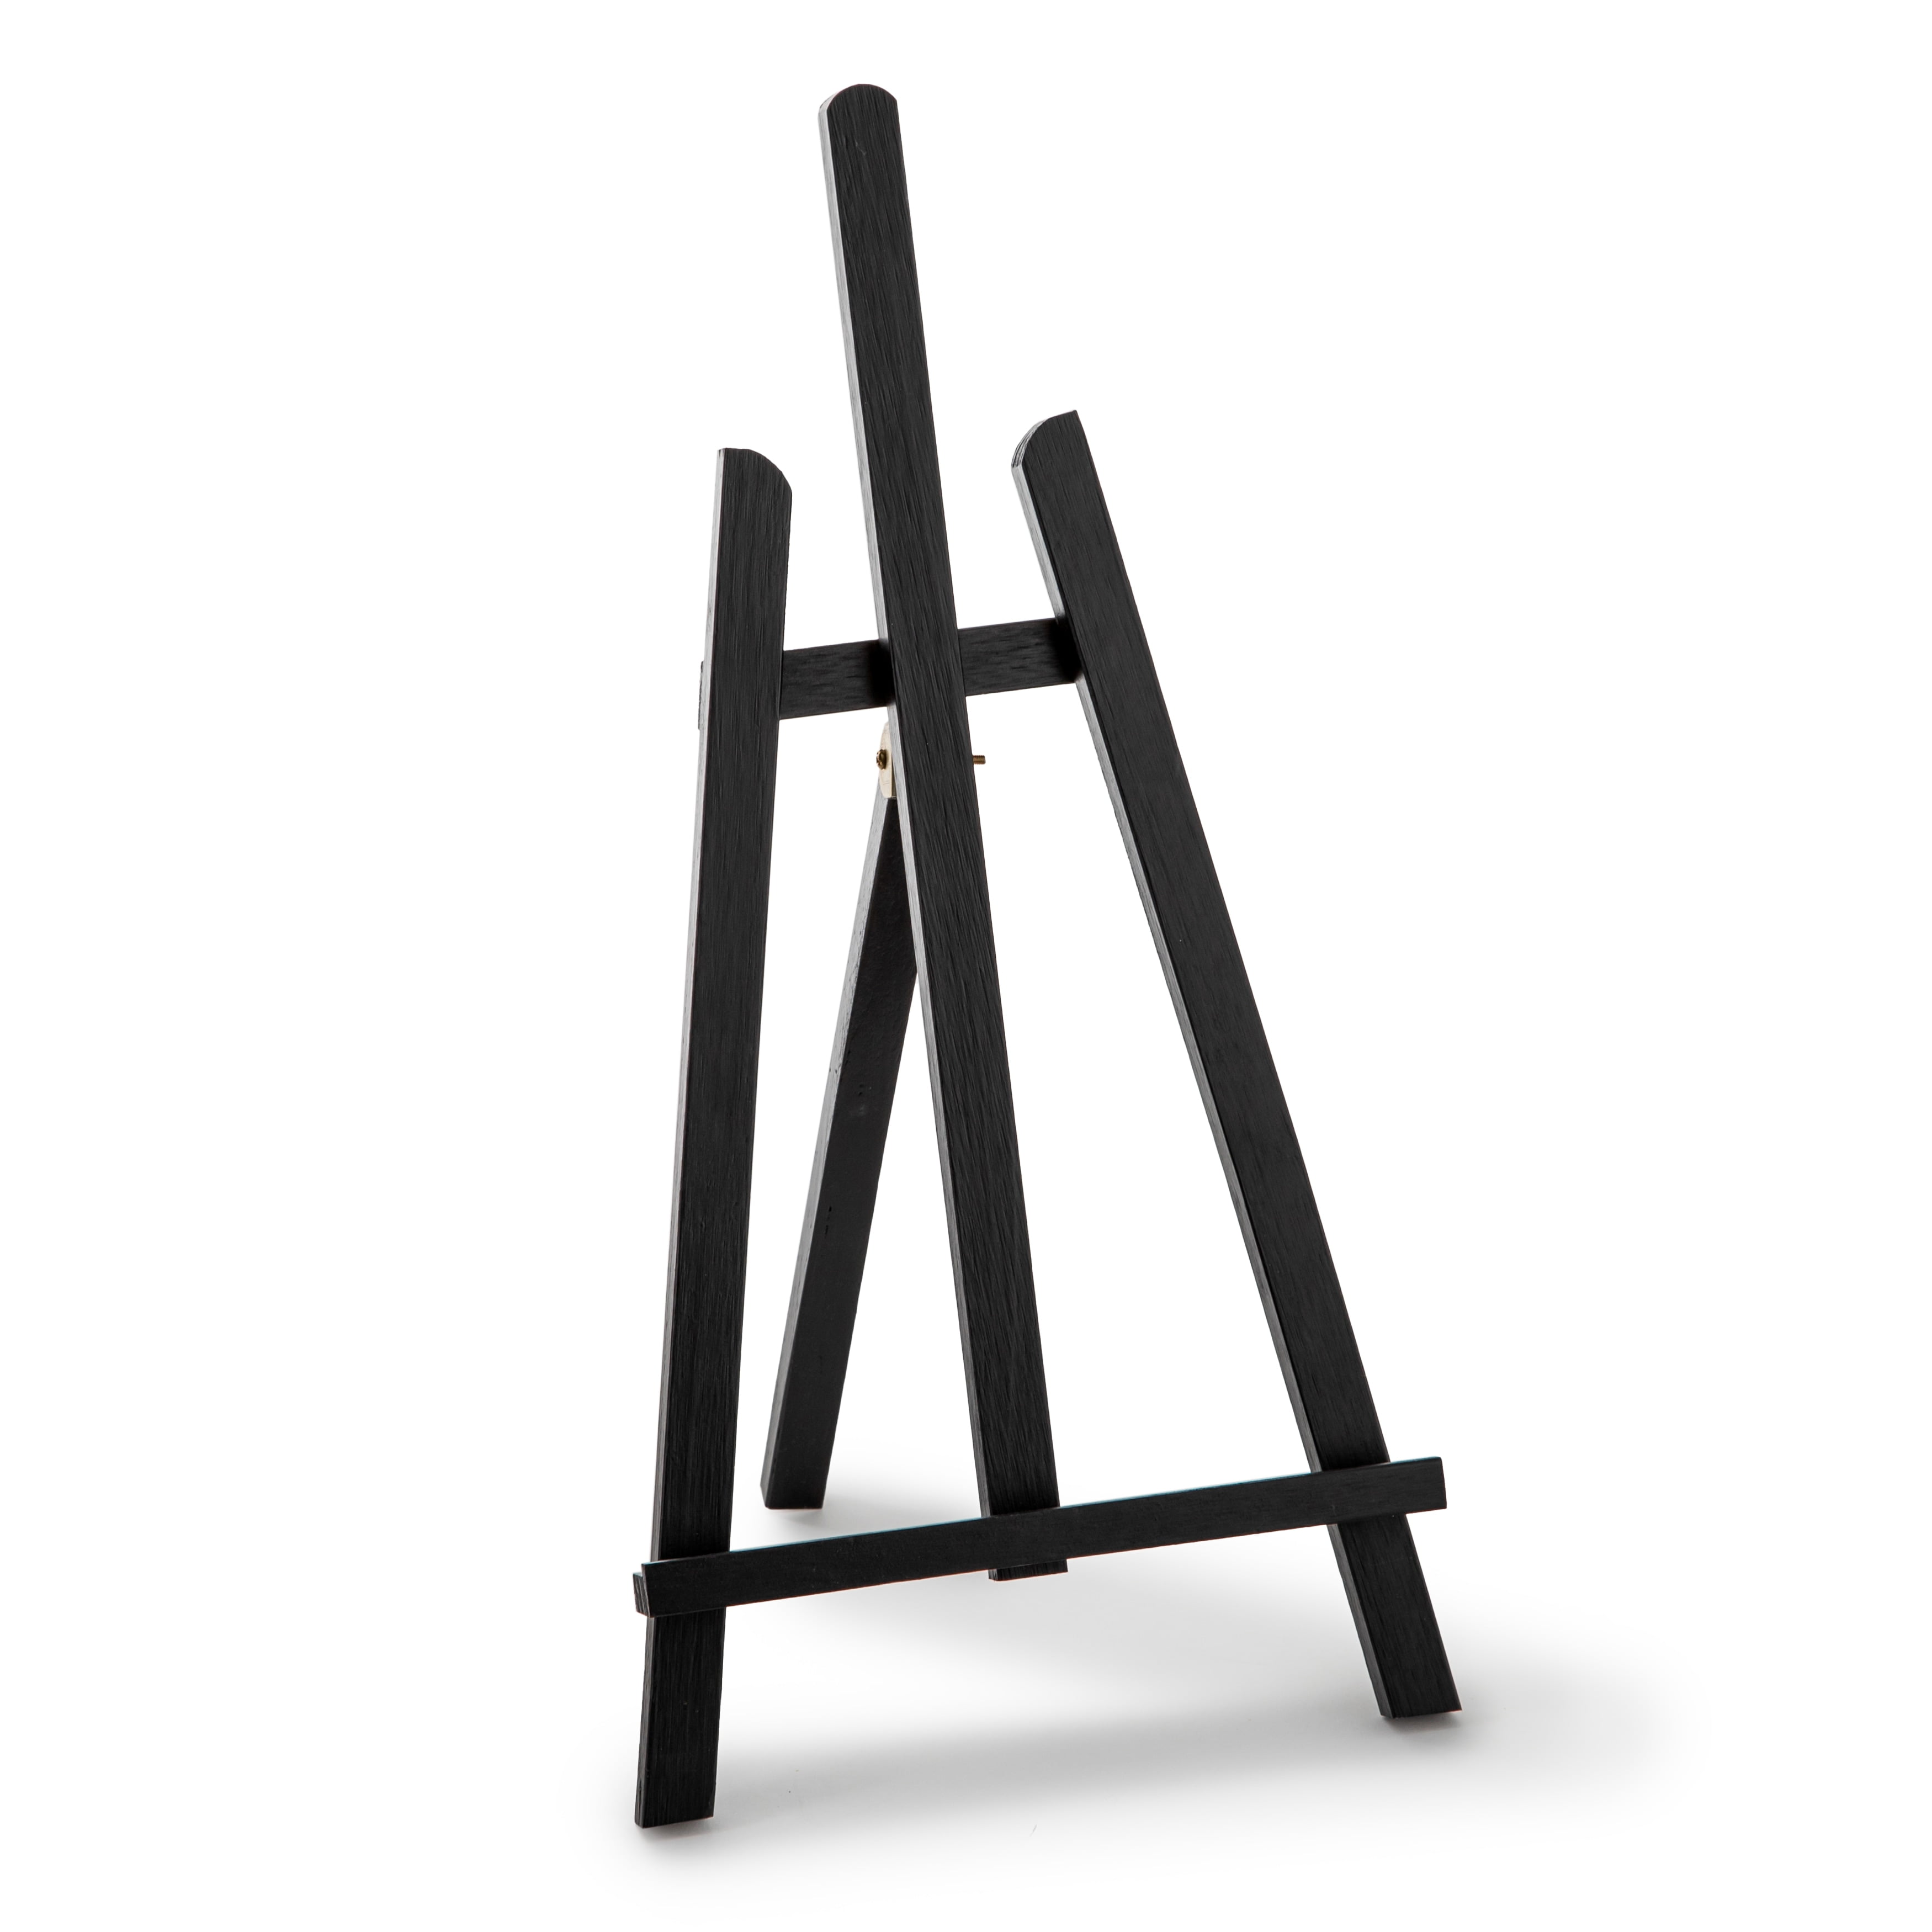 U.S. Art Supply 66 Silver Aluminum Tripod Artist Field Display Easel Stand  (Pack of 4) - Adjustable, Floor and Tabletop